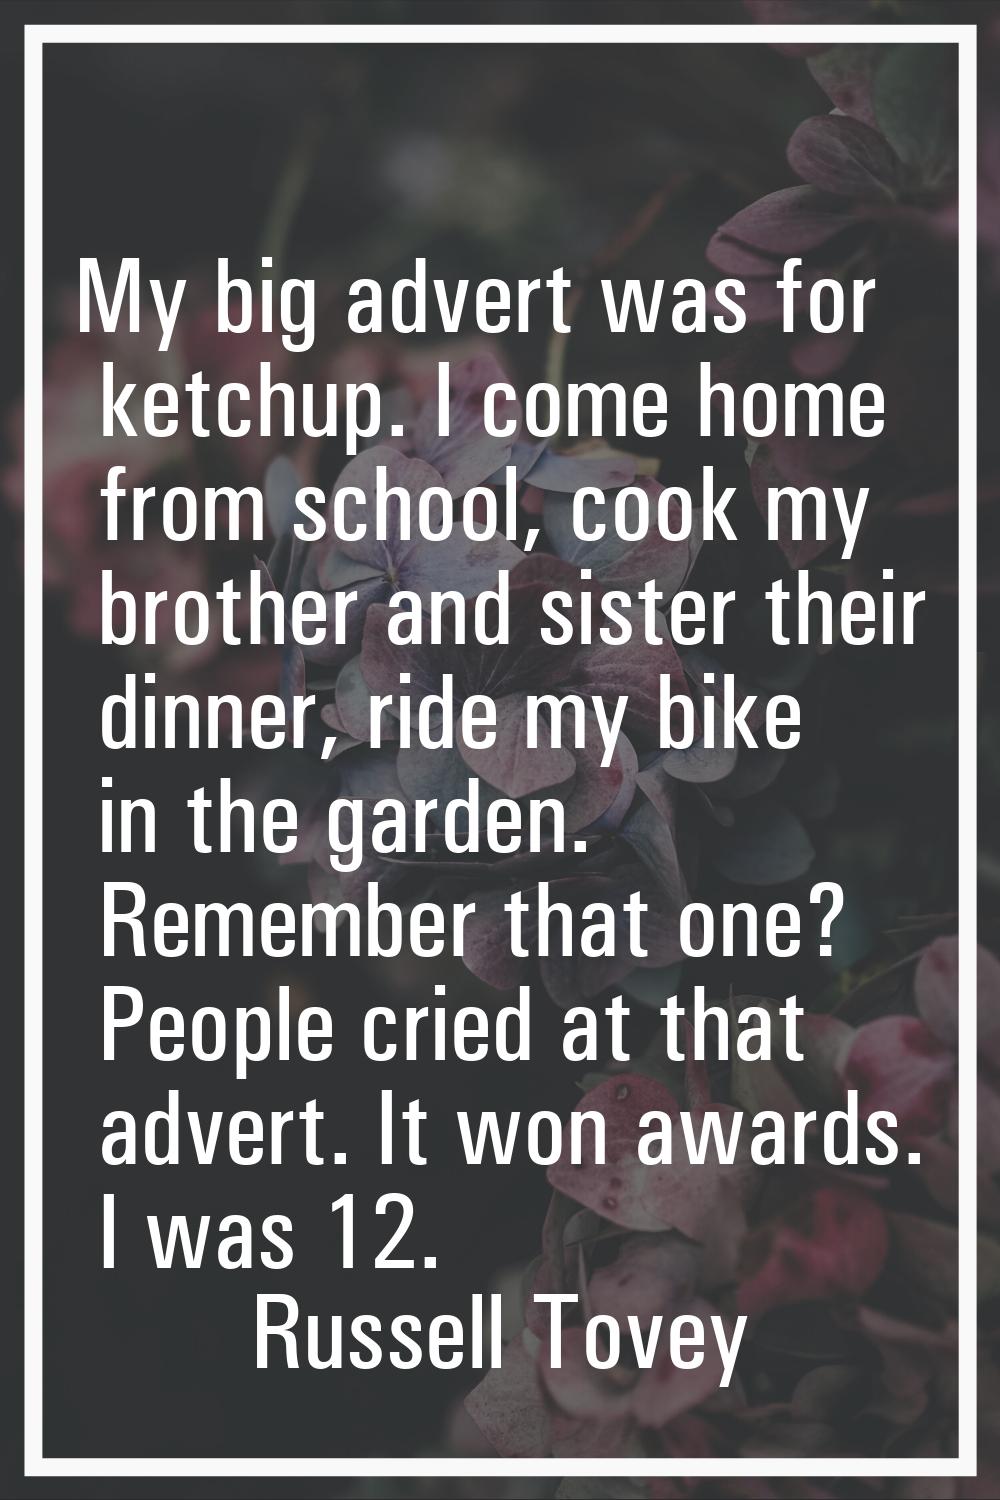 My big advert was for ketchup. I come home from school, cook my brother and sister their dinner, ri